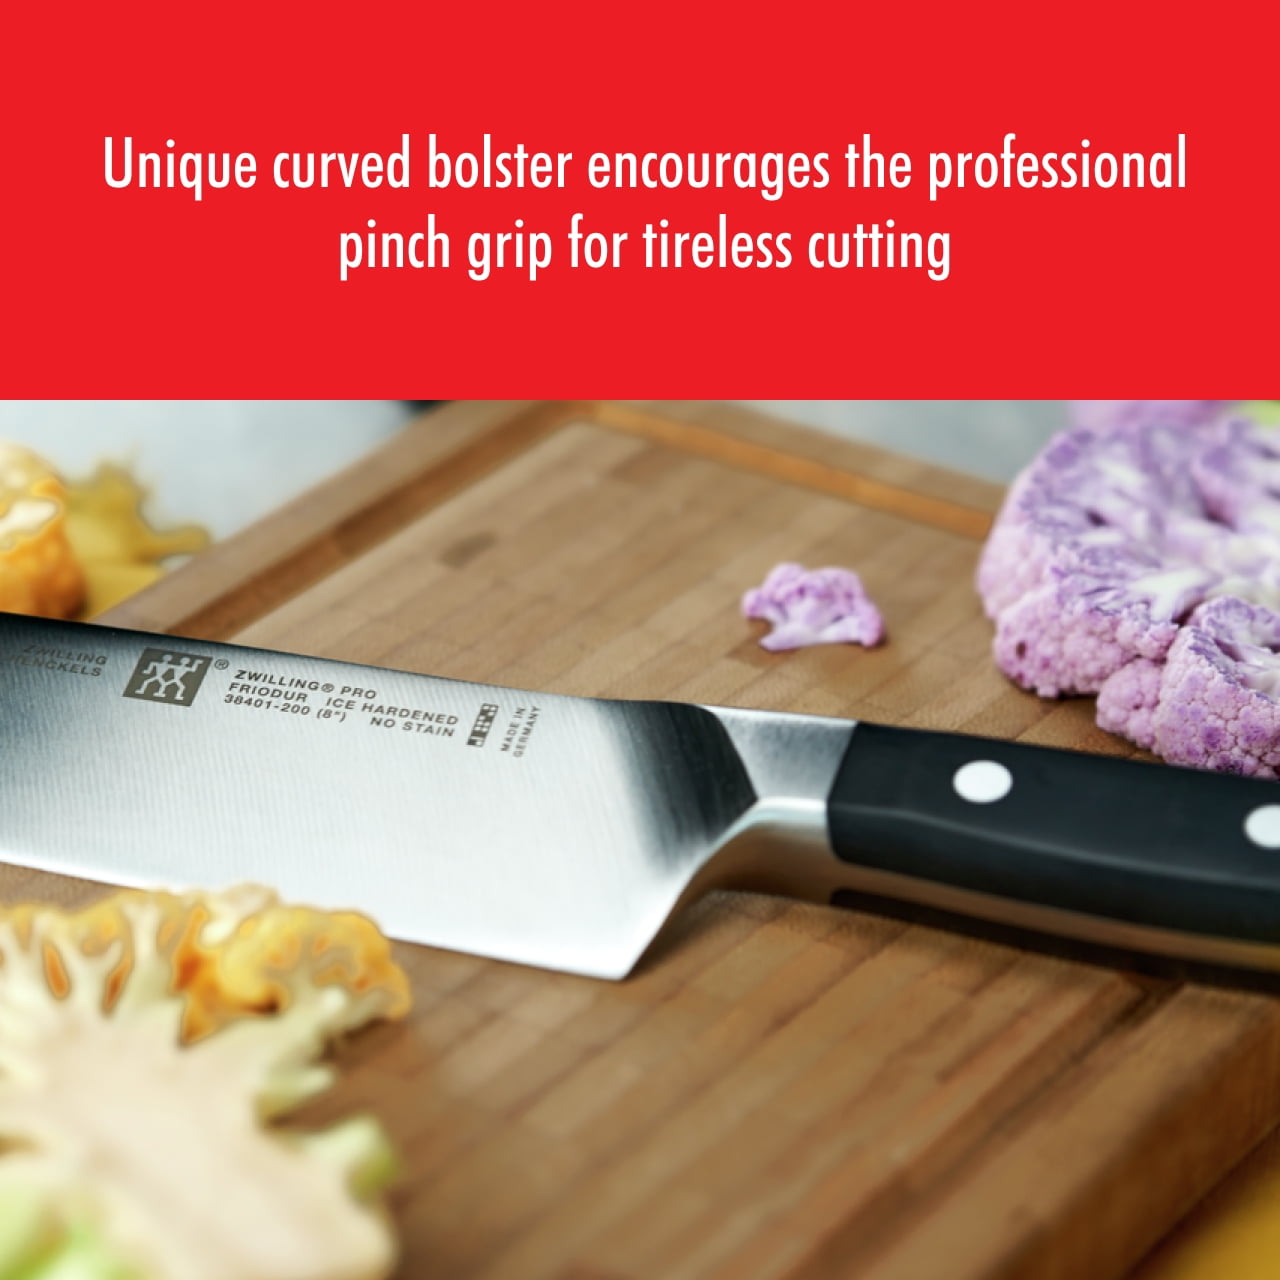 Zwilling J.A. Henckels Pro 7 Piece Kitchen Block Set with Self-Sharpening  Block and Cutting Board - KnifeCenter - 35674-000